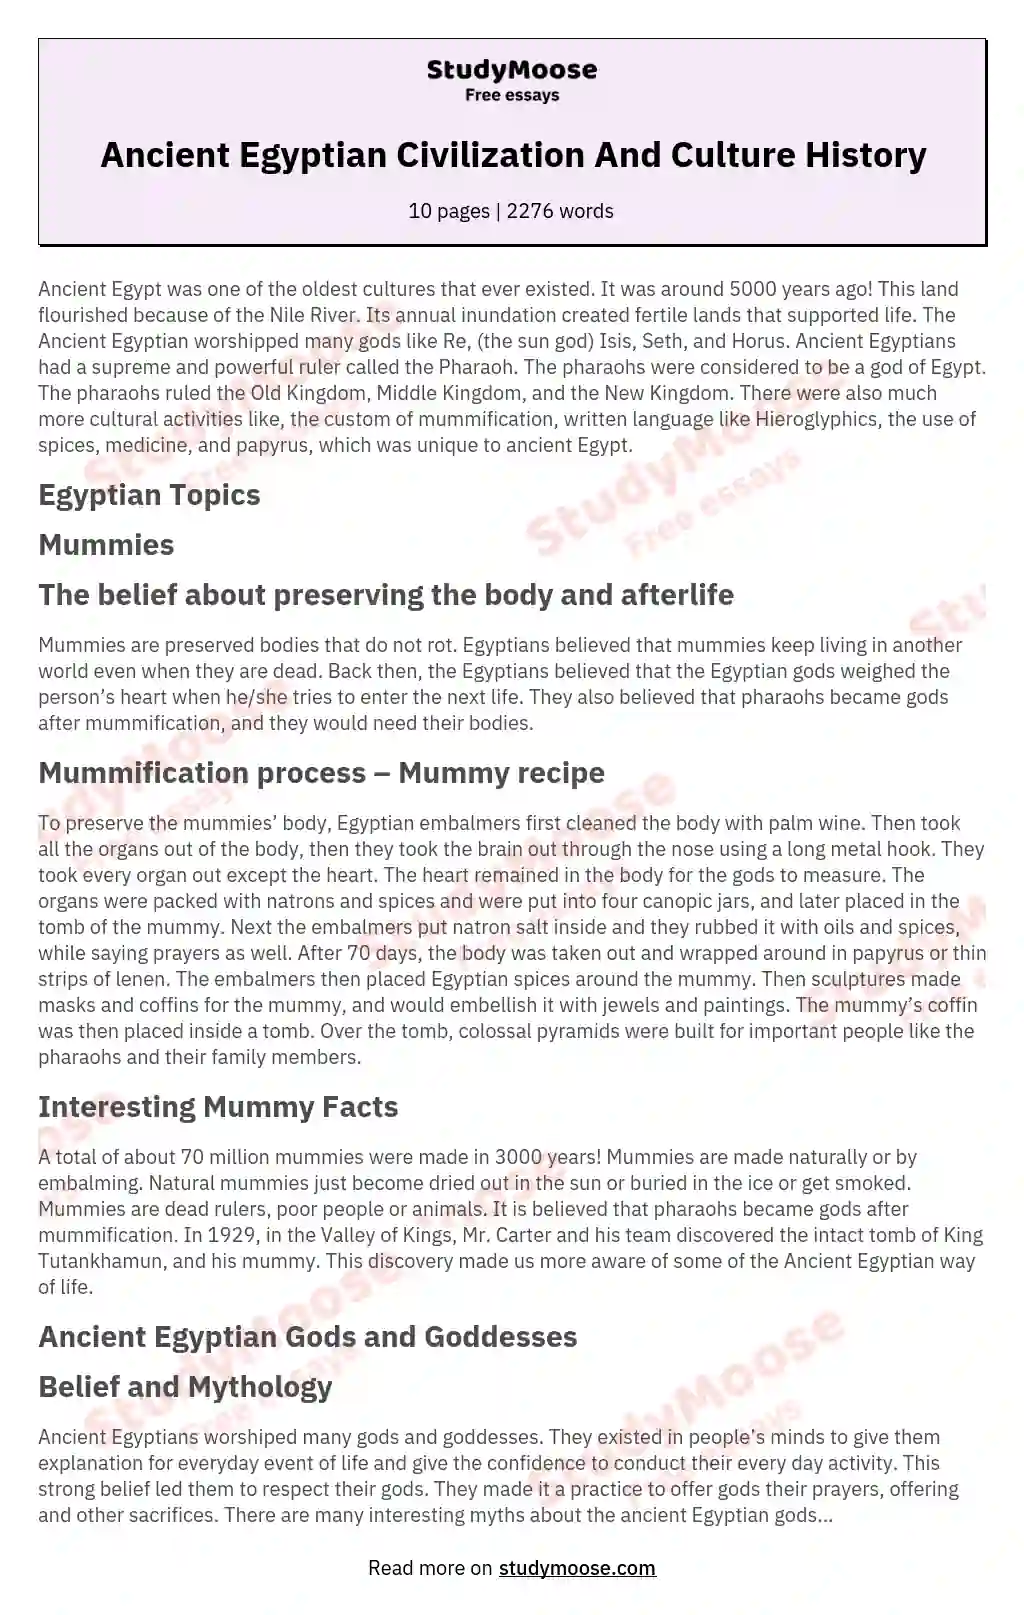 Ancient Egyptian Civilization And Culture History essay